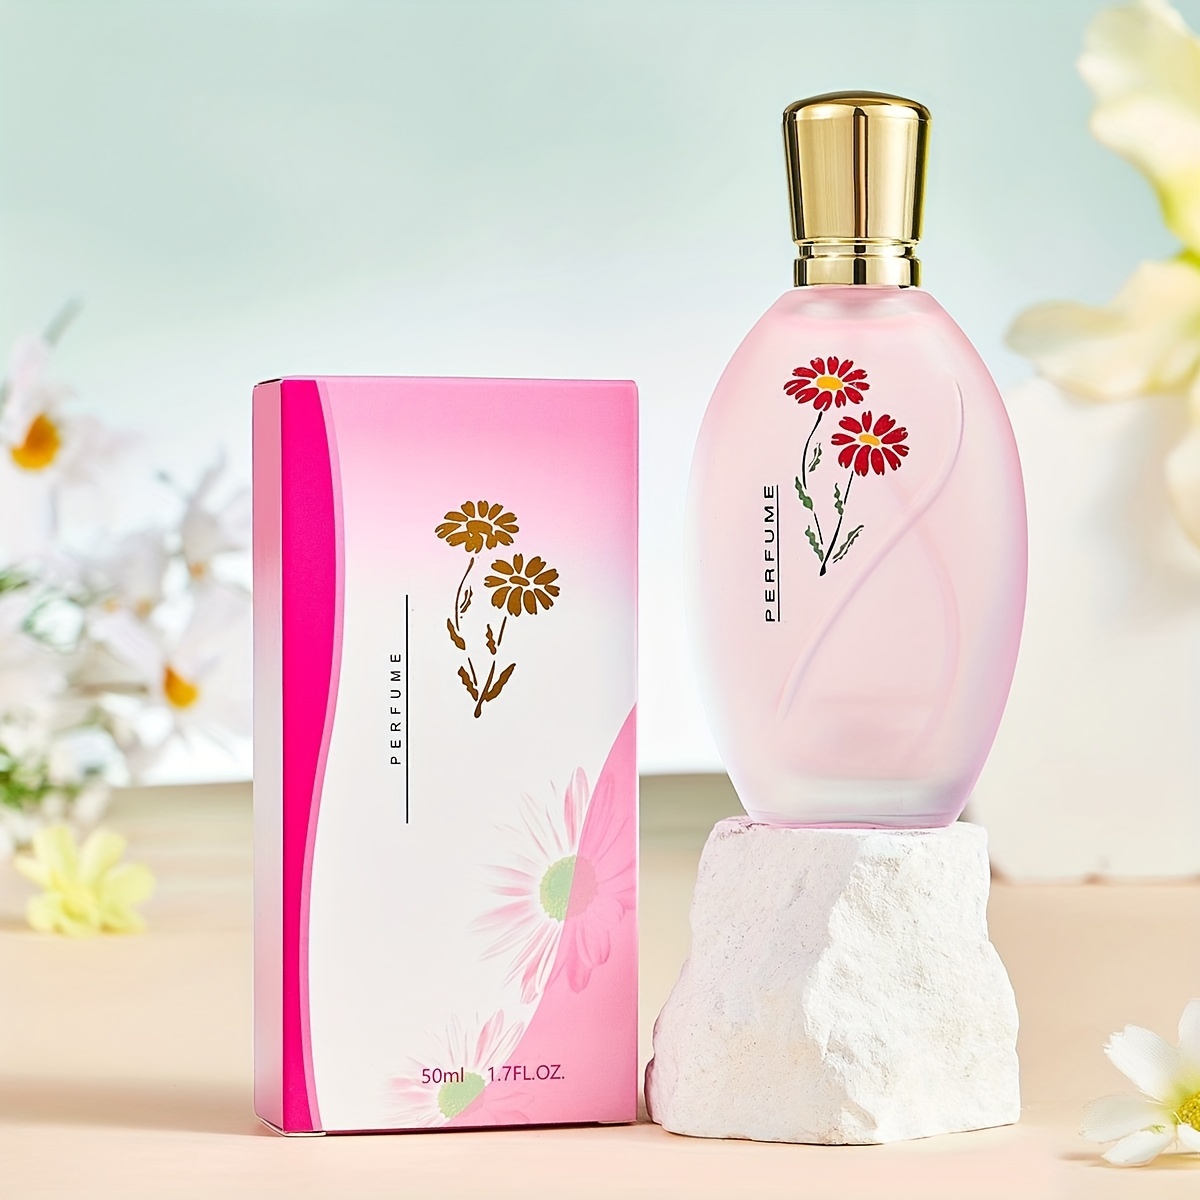 Refreshing And Long Lasting Osmanthus/Rose/Jasmine/Lavender/Gardenia  Fragrance, Eau De Toilette Spray For Women, Floral Perfume For Dating And  Daily L